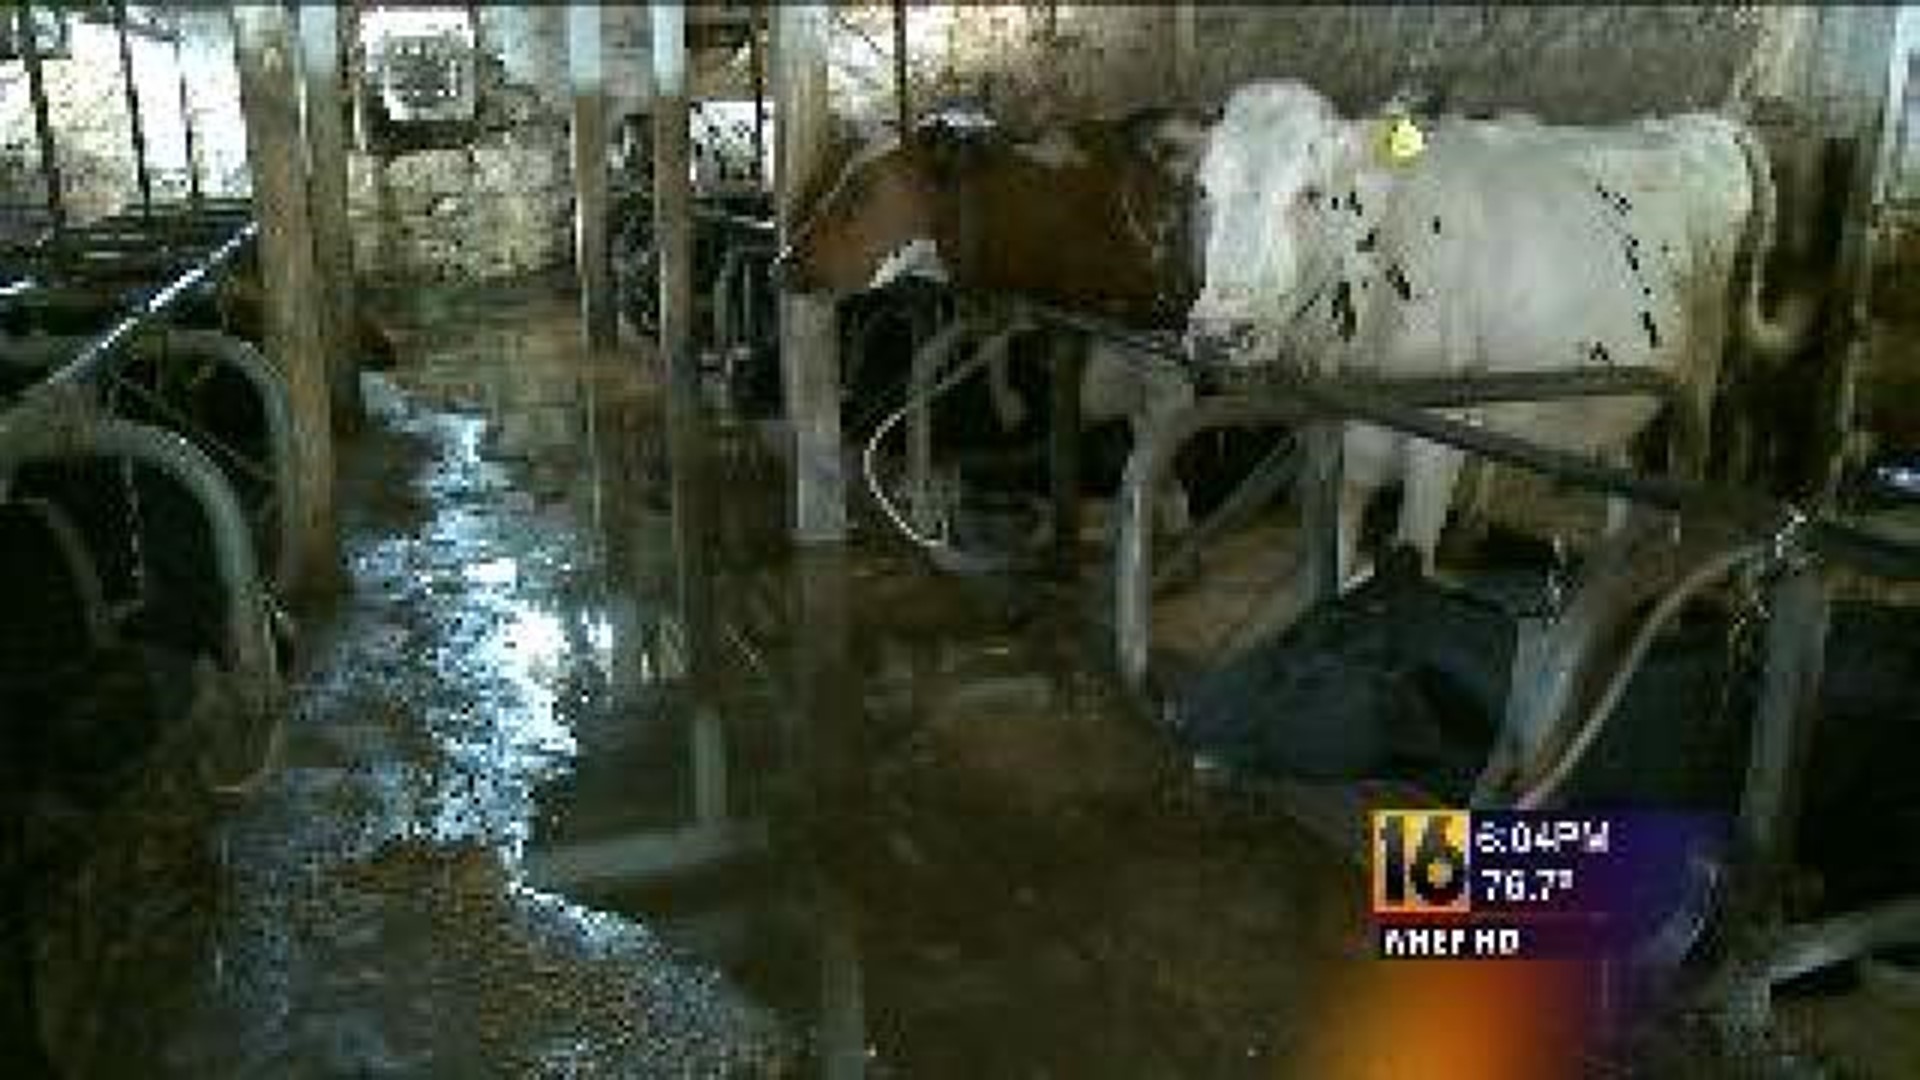 Cows Saved from Flooded Barn